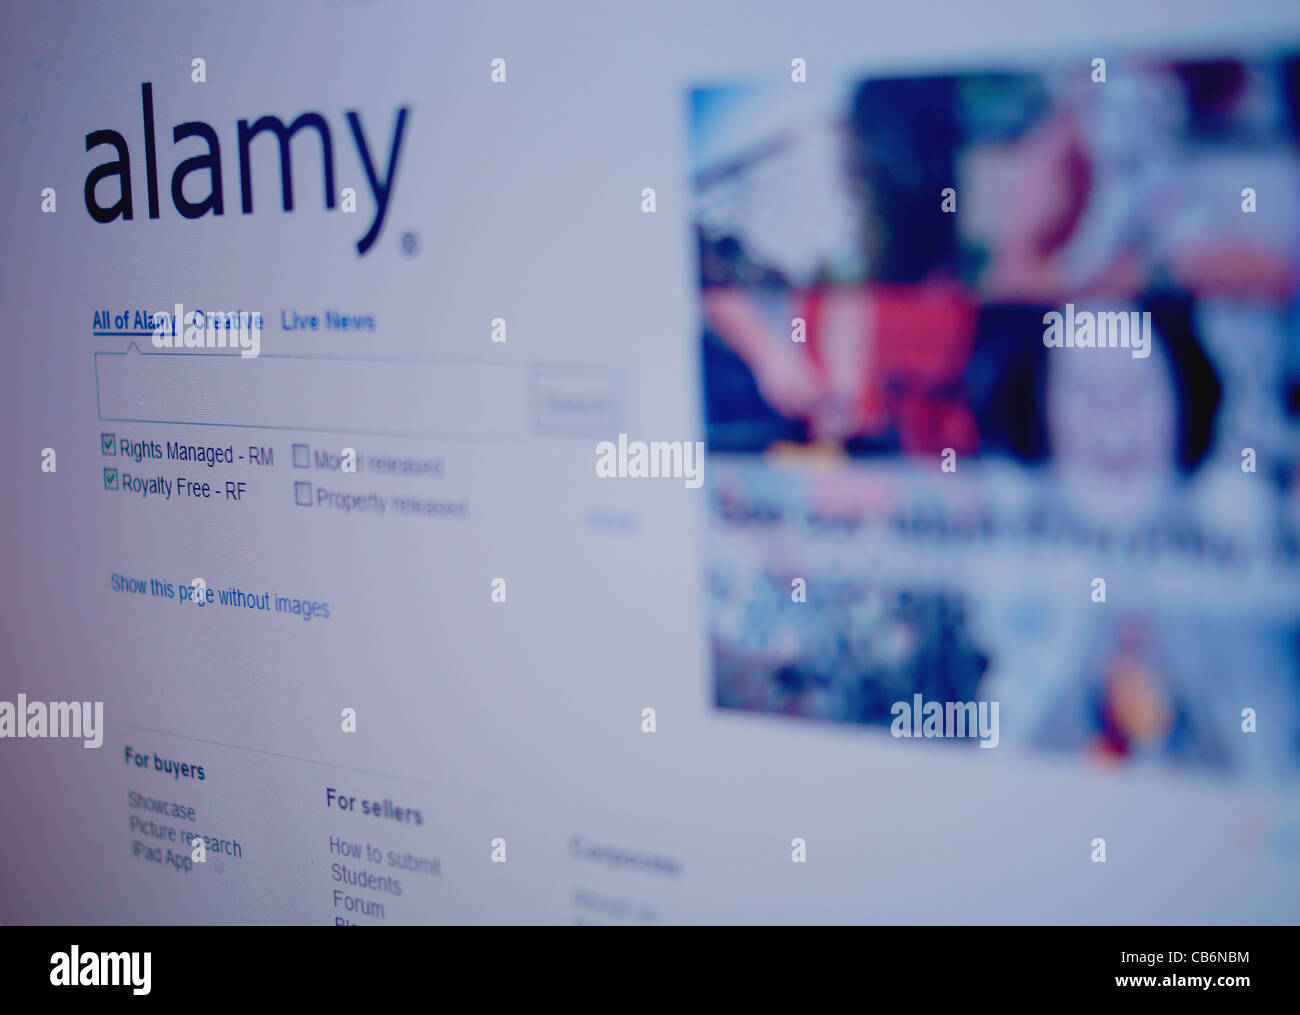 Alamy web site front page Stock Photo